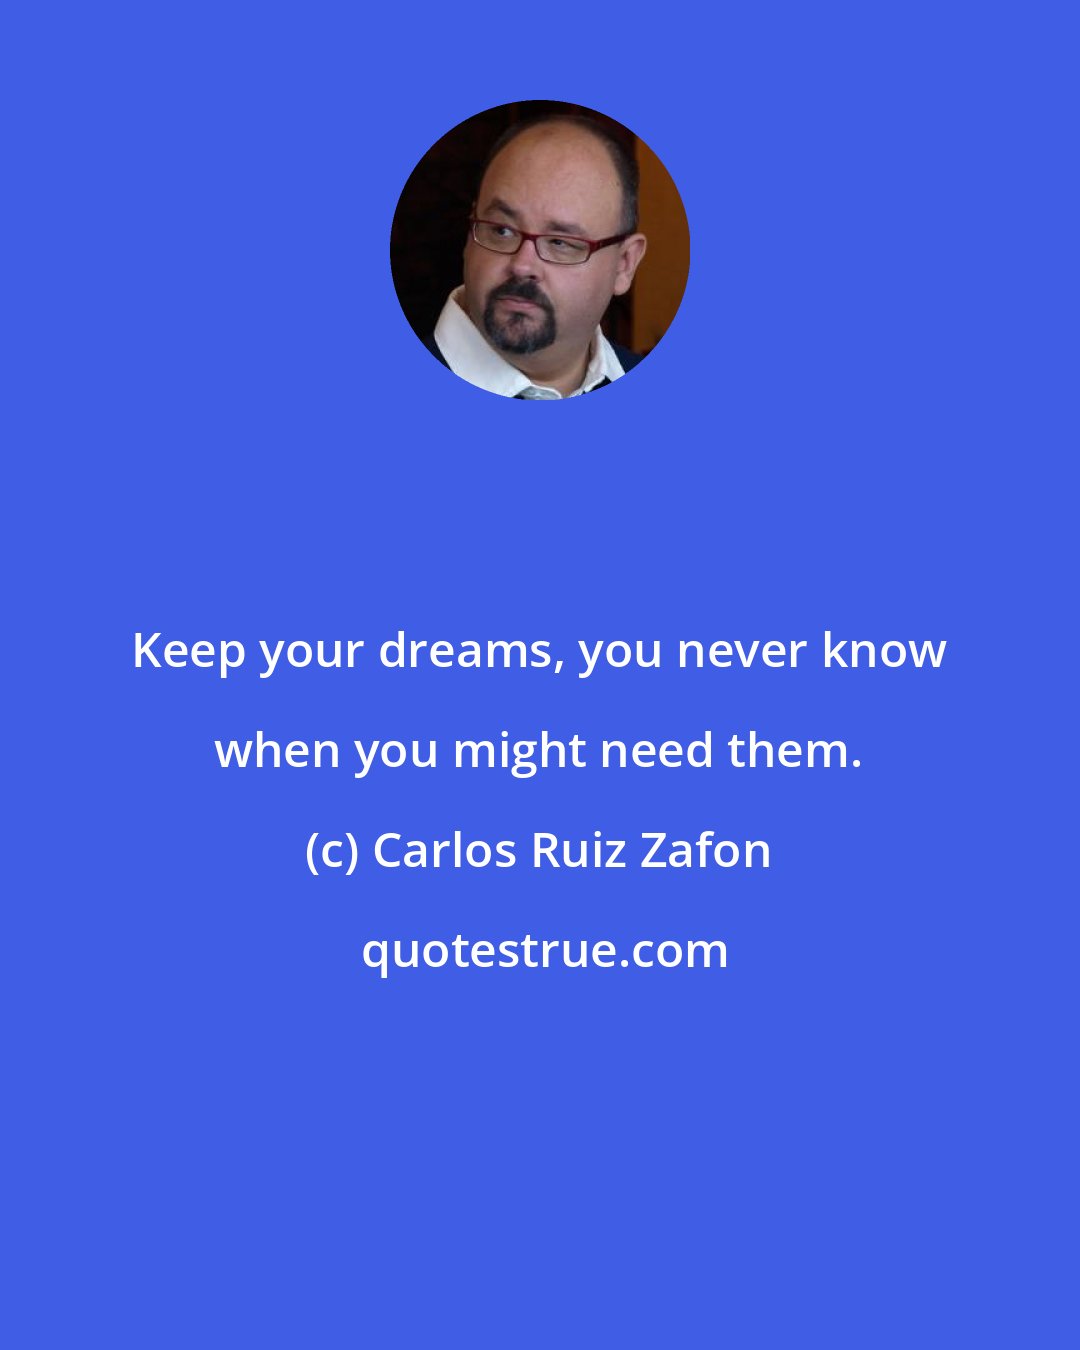 Carlos Ruiz Zafon: Keep your dreams, you never know when you might need them.